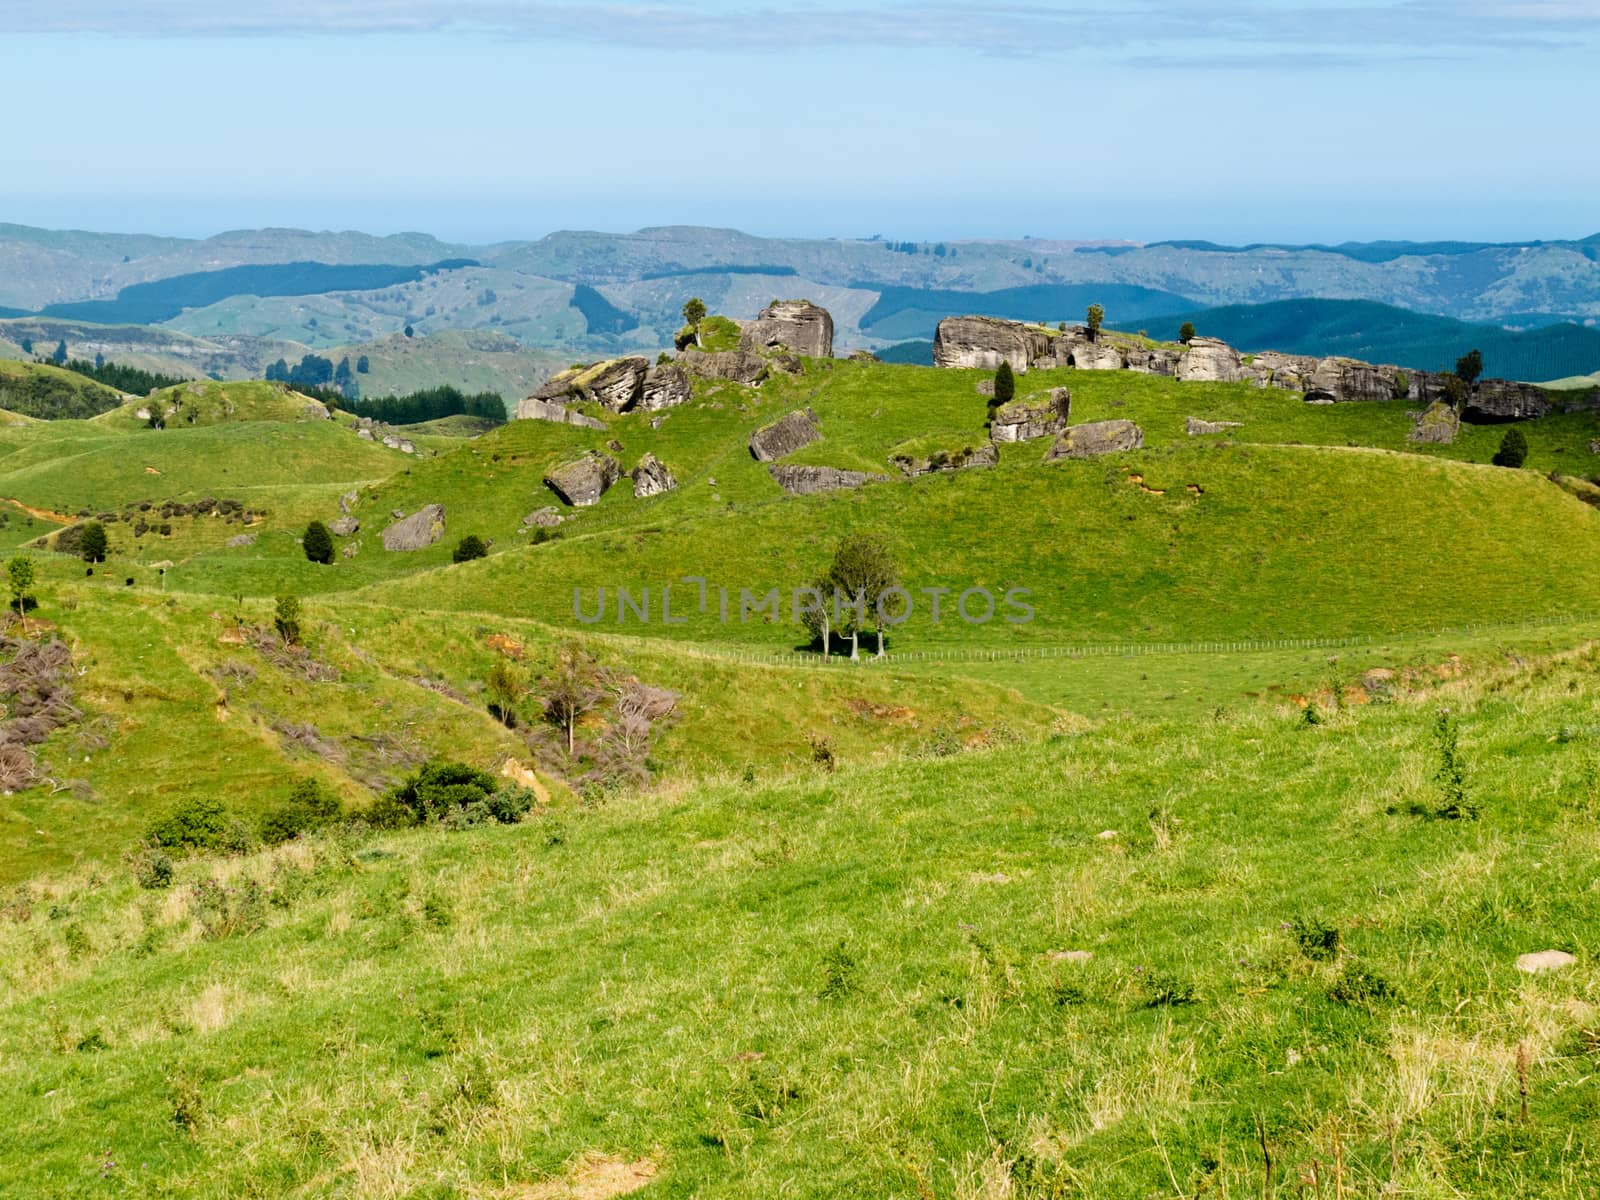 Scenic landscape of rural farmland pasture in hill country of Hawke's Bay district on North Island of New Zealand